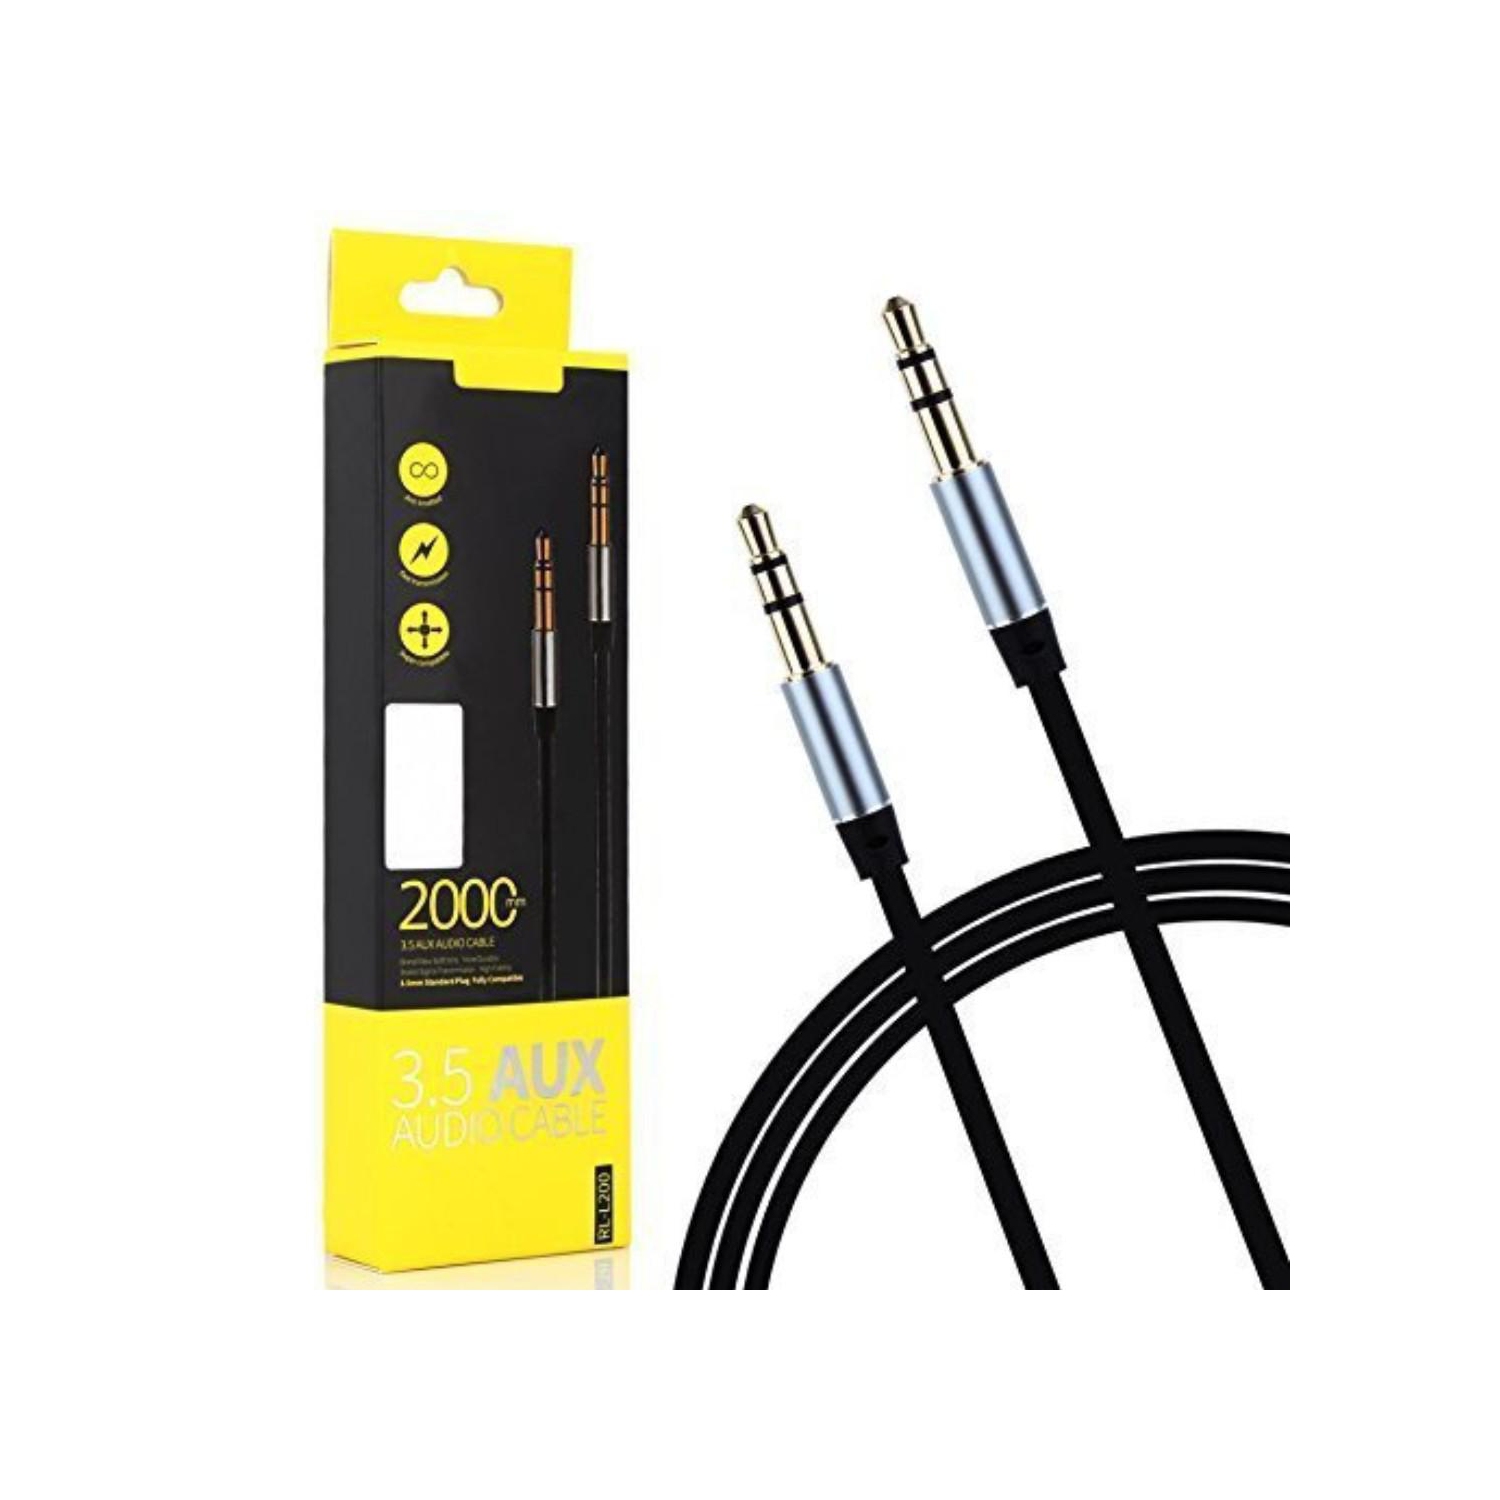 AUX Cable 3.5mm Audio Cable REMAX Male to Male 6 Feet AUX Cord Cables for Auto Stereo Speaker iPhone iPod iPad Black